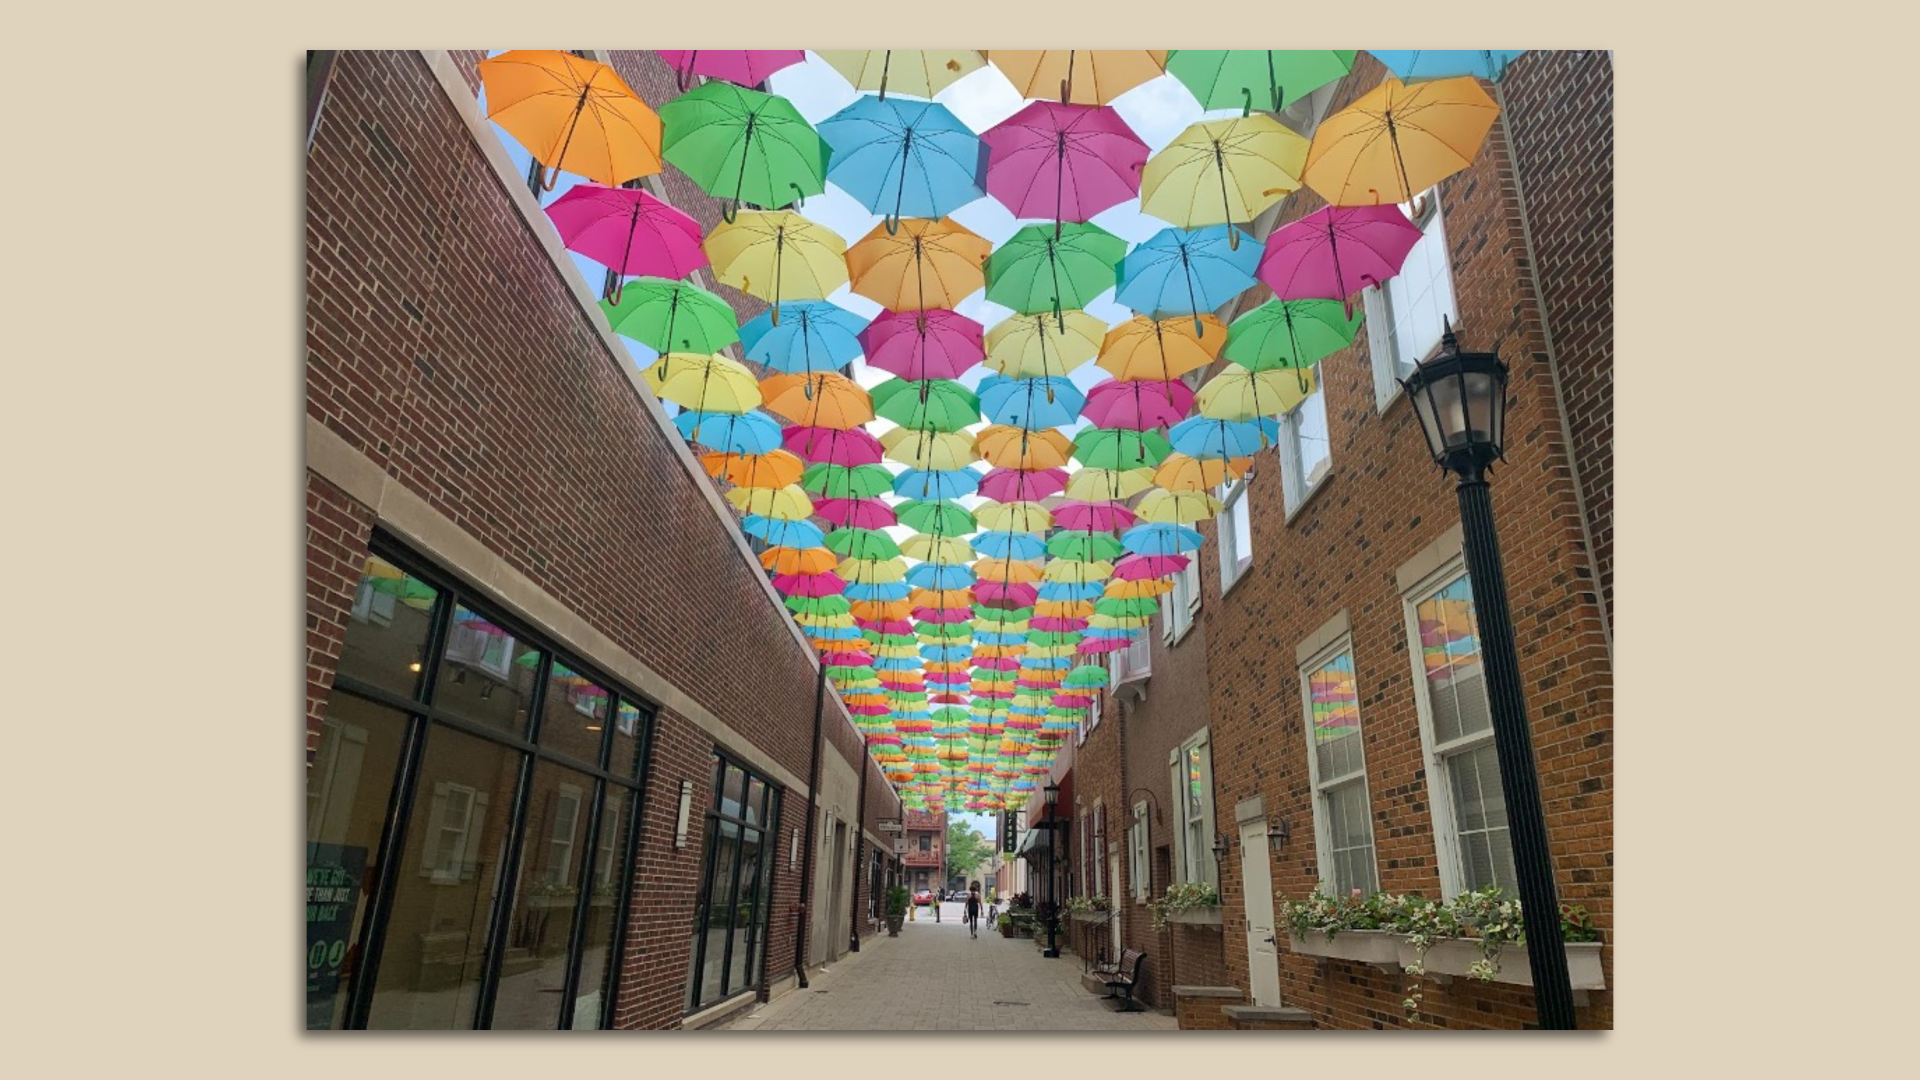 A colorful umbrella art installation floats in an alleyway in DuPage County.